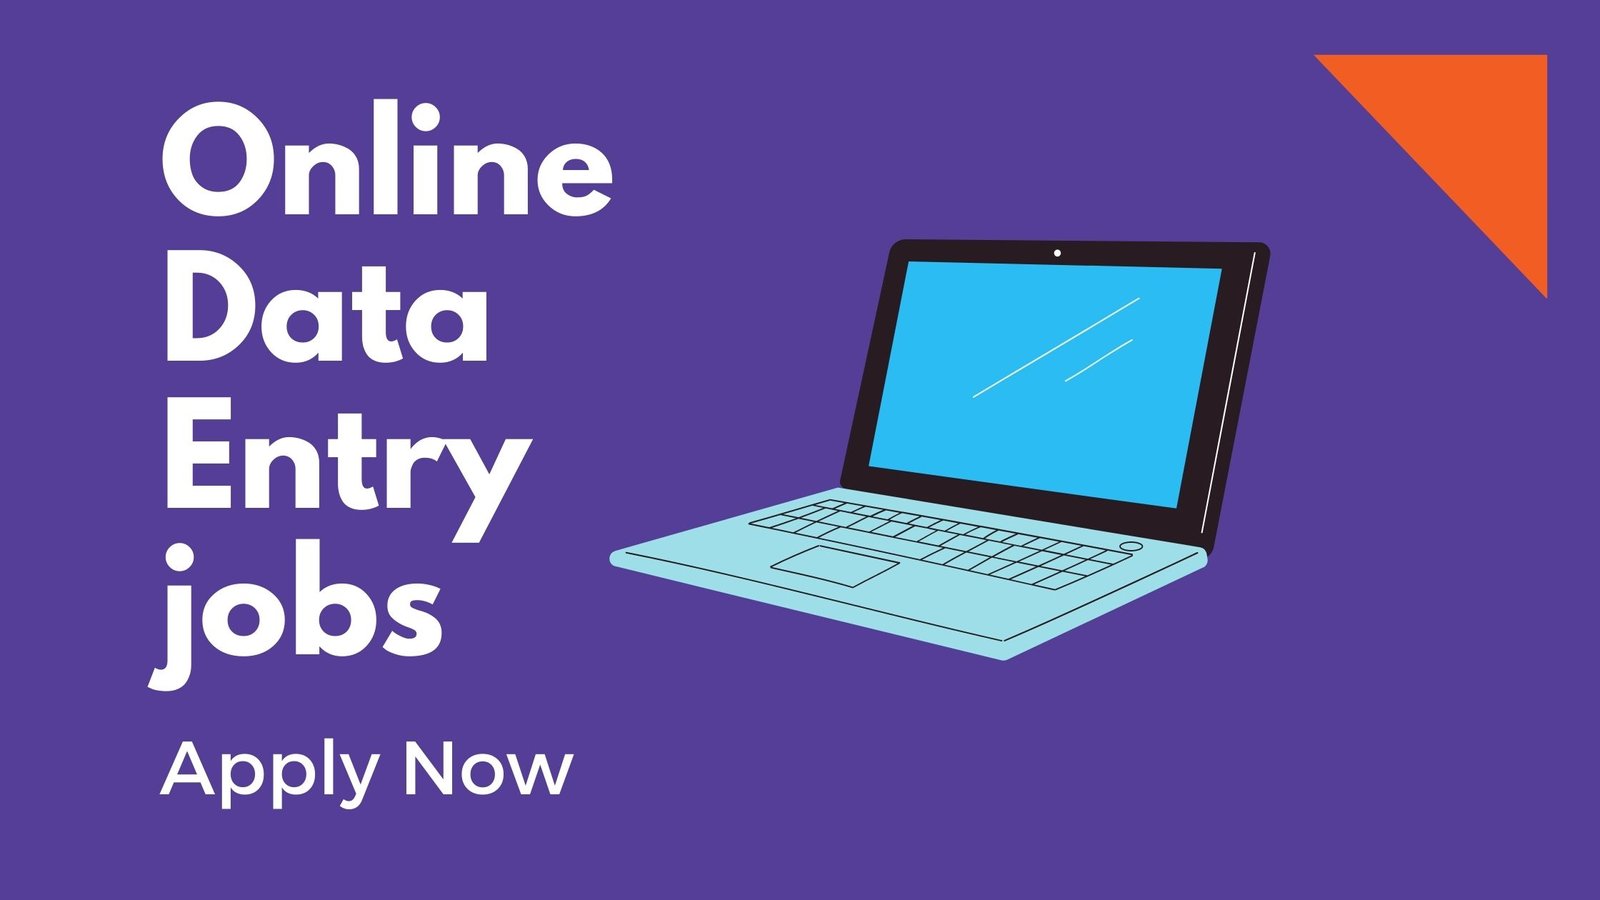 Online Data Entry jobs from home